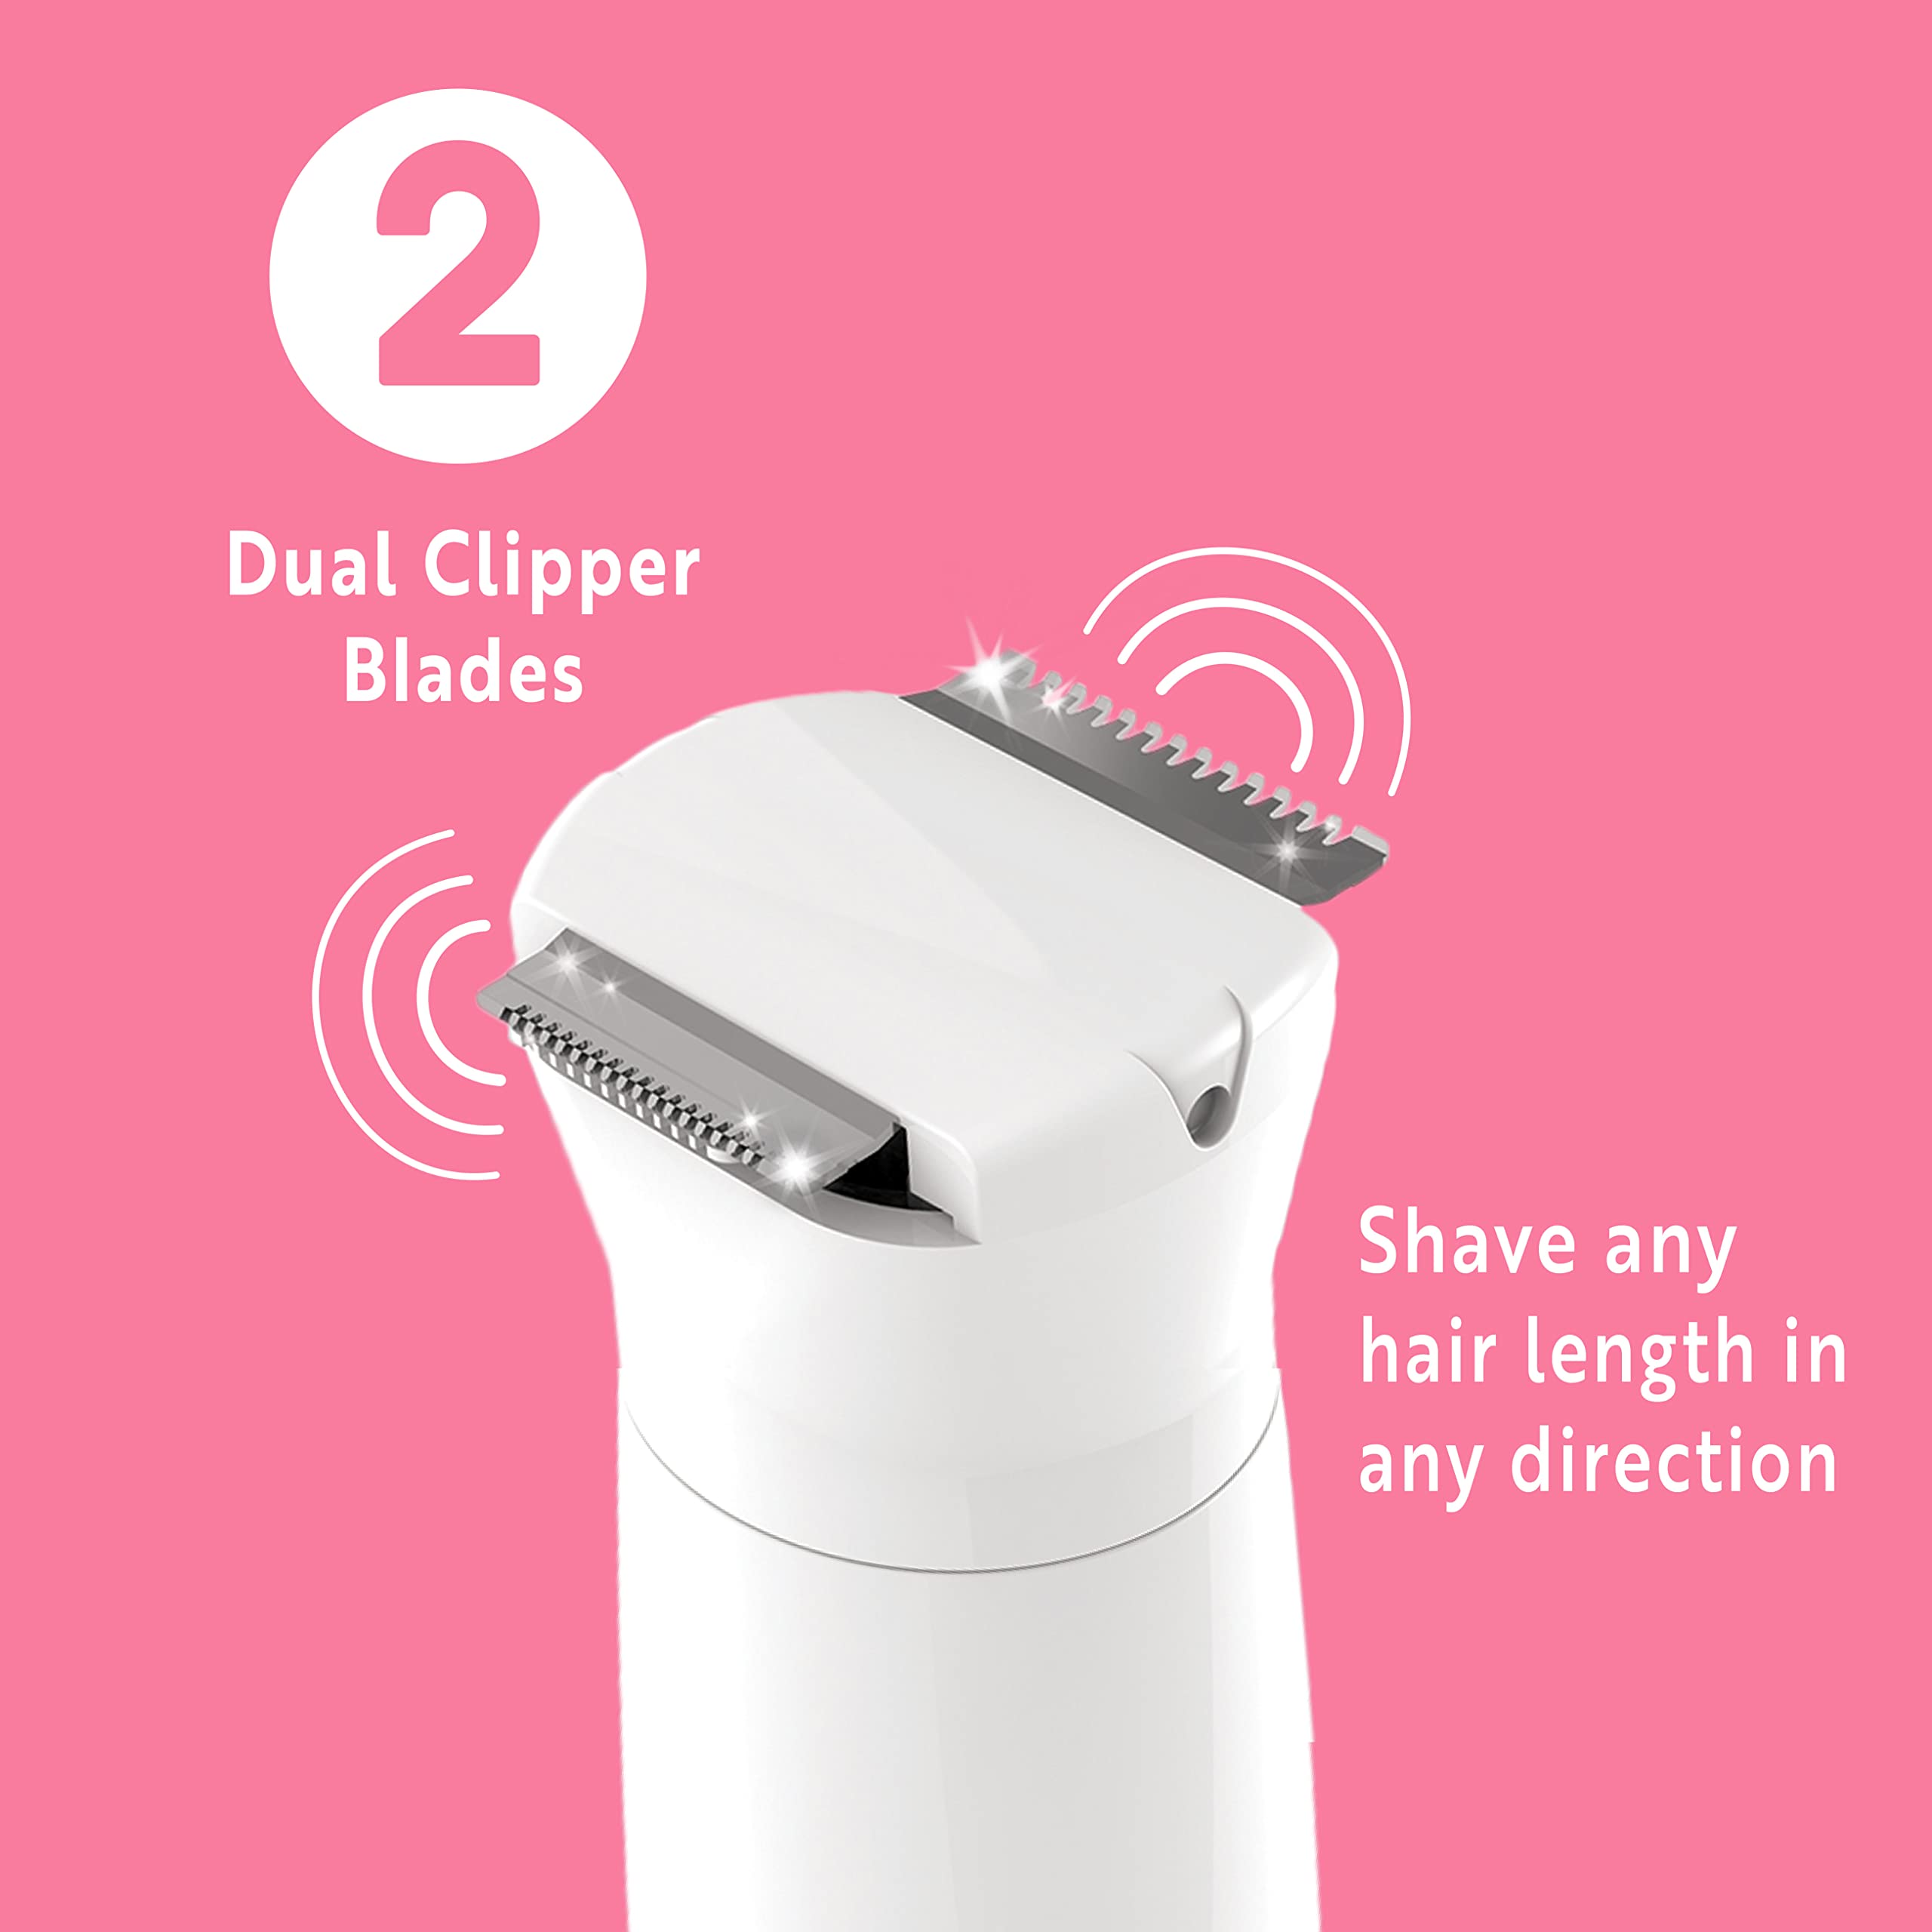 Clio PALMPERFECT Bikini Trimmer for Women - Wet & Dry Hair Trimmer with Dual Blades - Cordless Hair Removal Electric Razor for Any Part of the Body, White (Packaging May Vary)